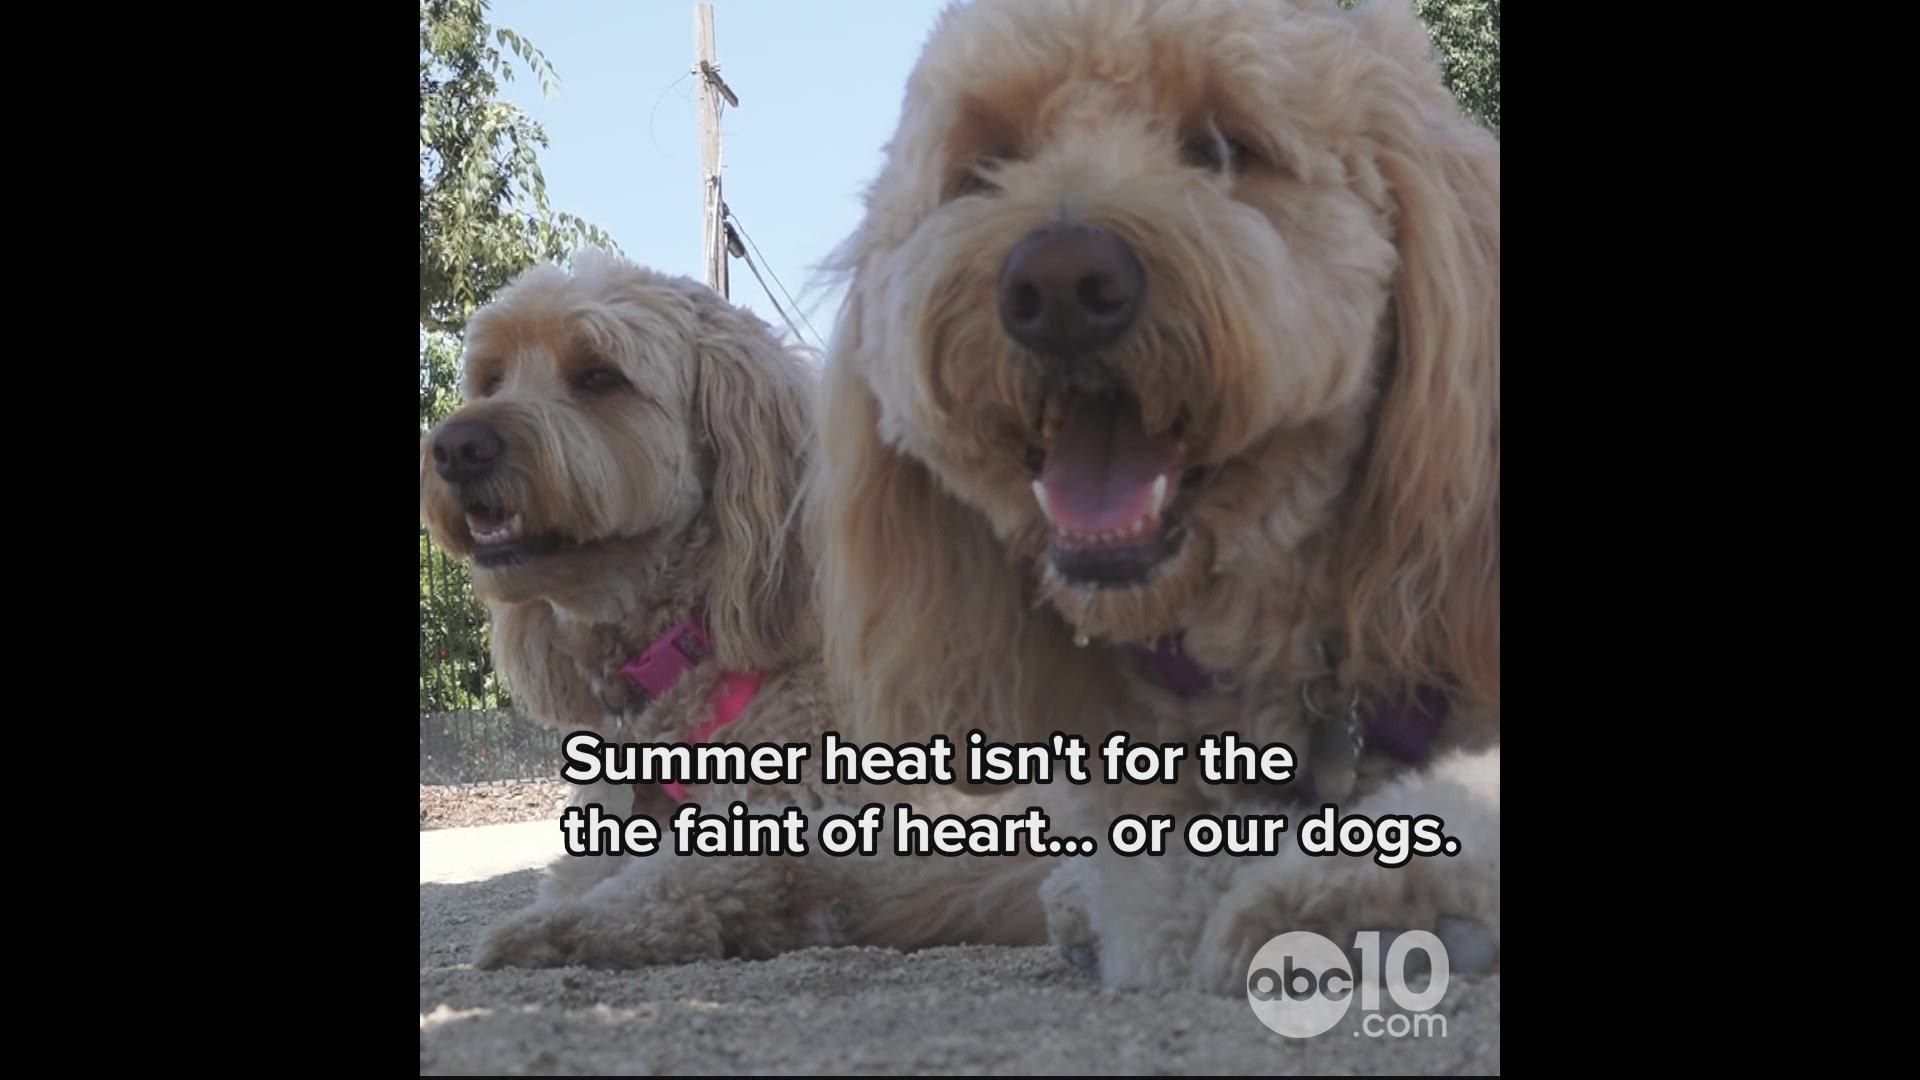 Northern California summers are no joke. Do you know what to look out for when it's hot and you have a pet?